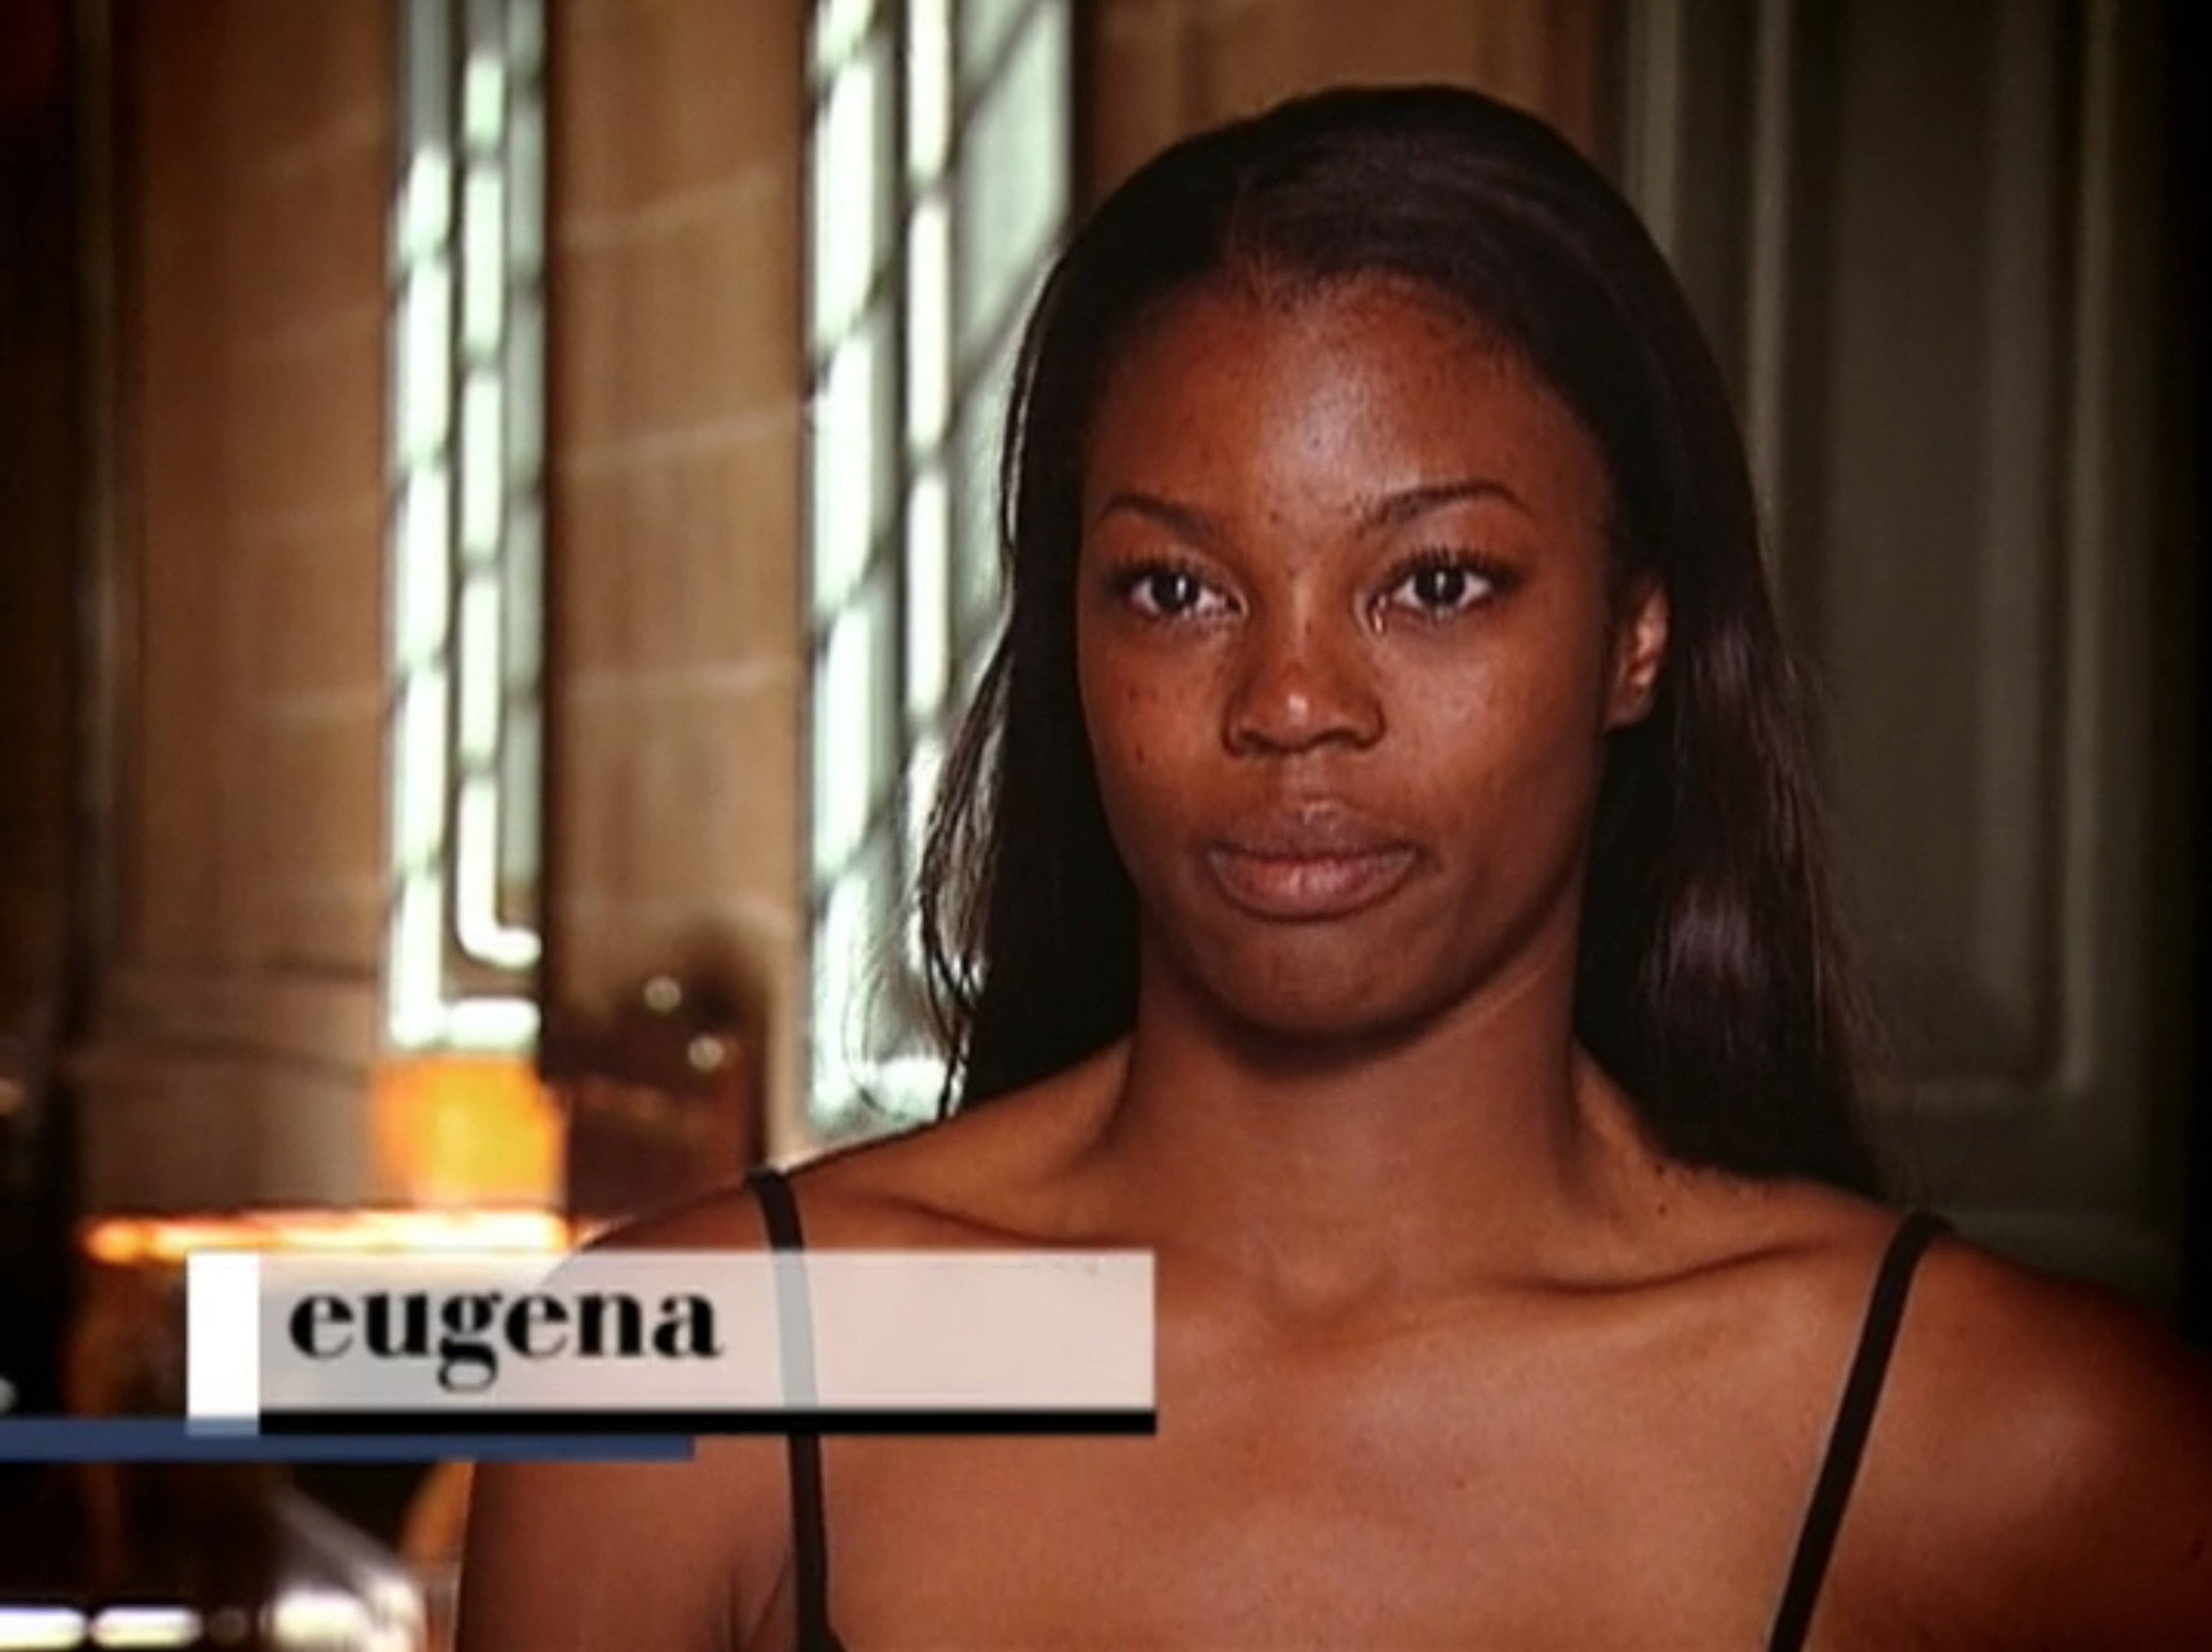 Eugena talking in a confessional